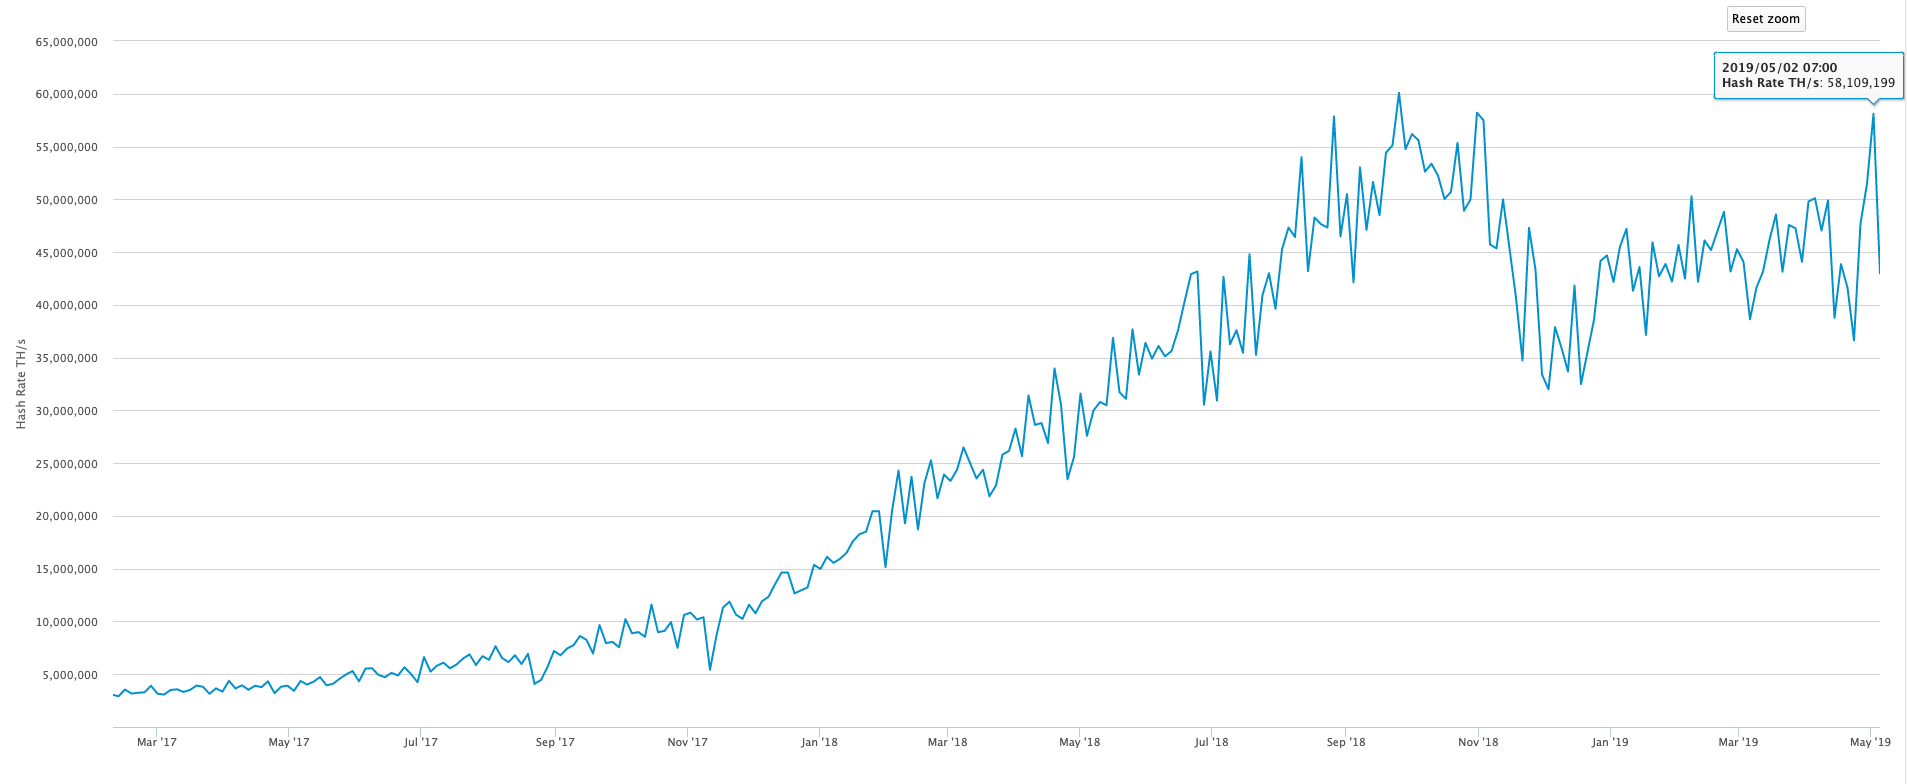 bitcoin-hash-rate-traderviet3.png